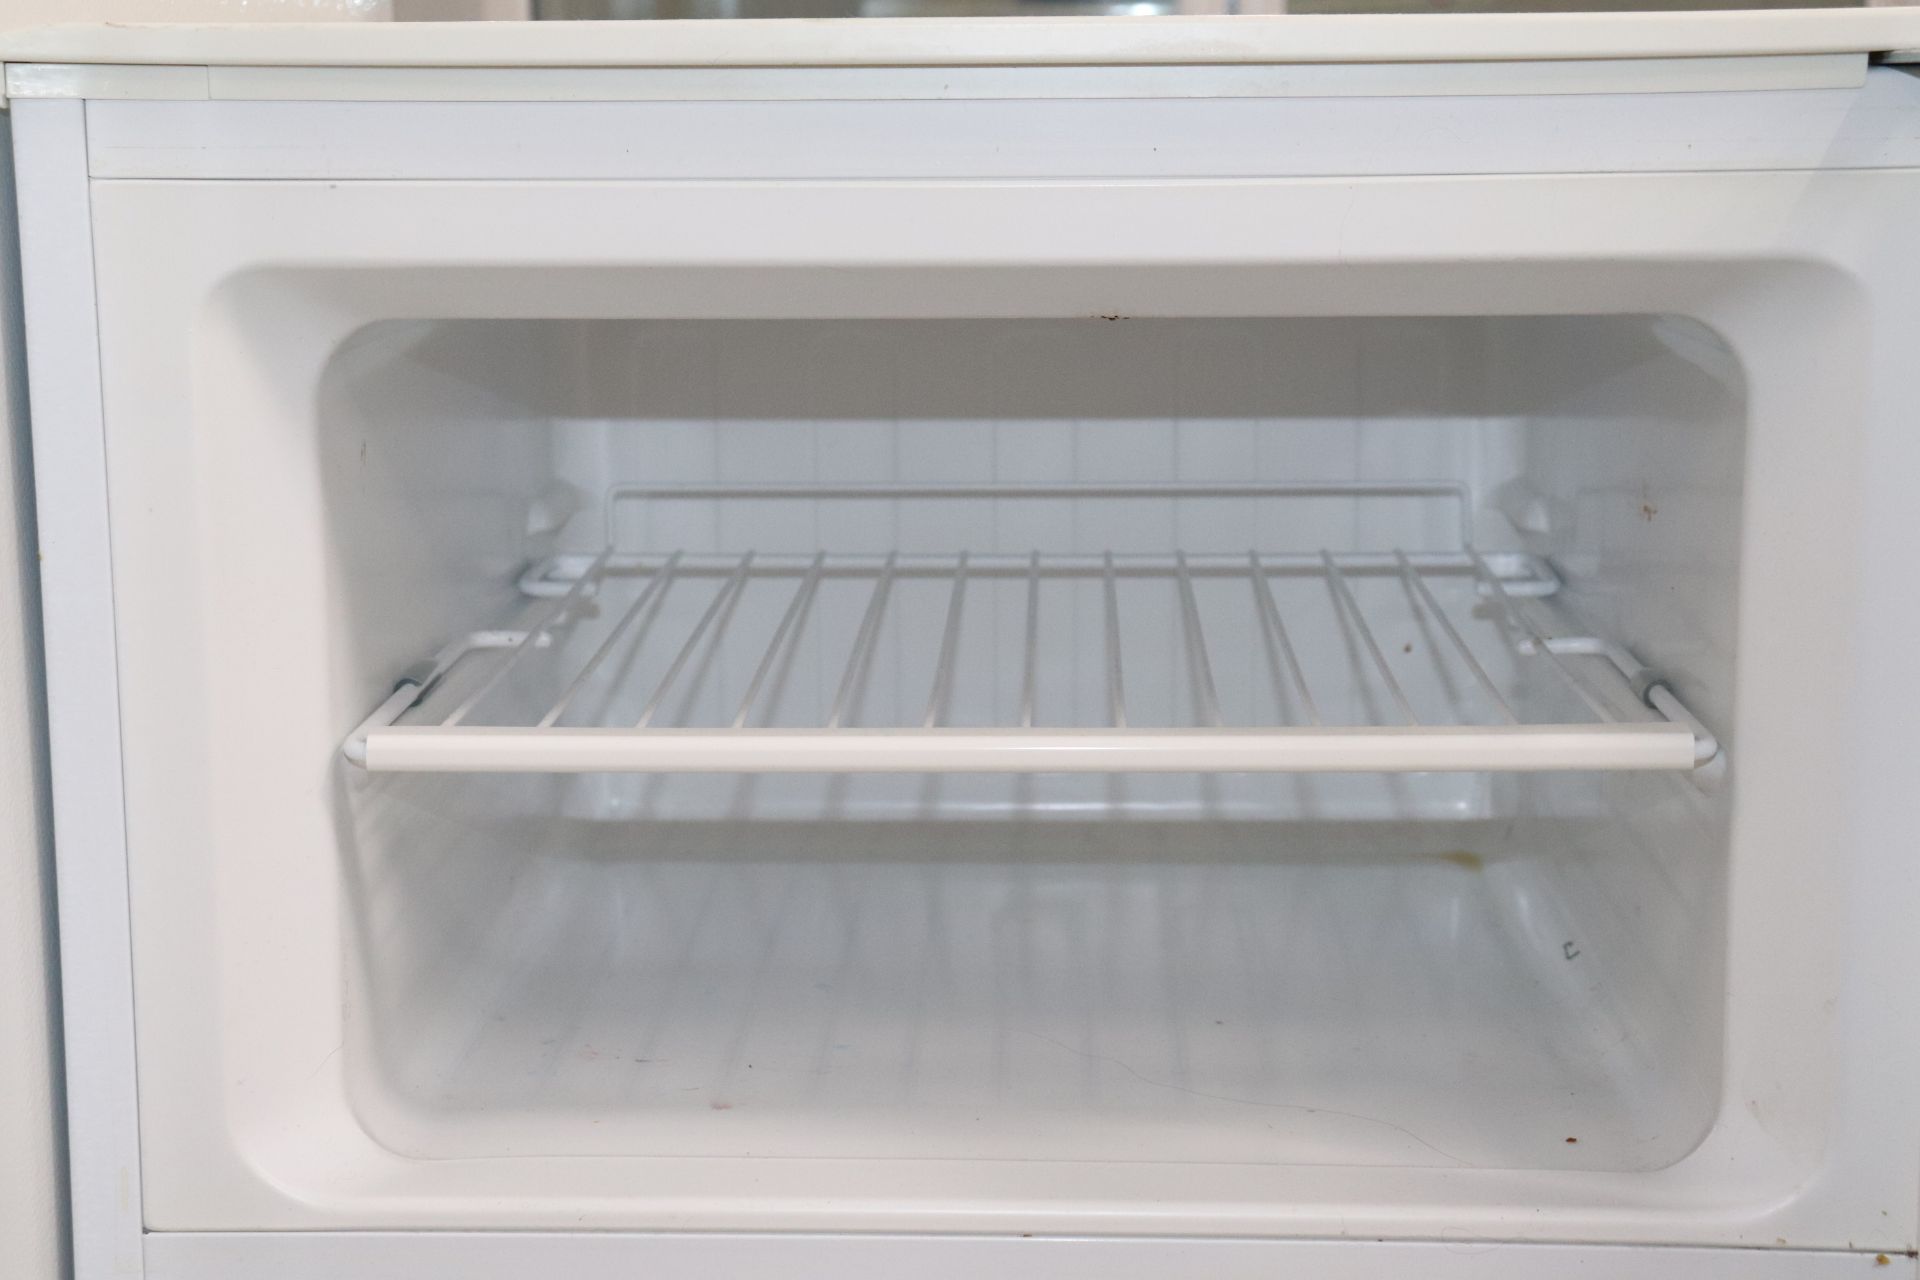 Criterion Combination Freezer/Refrigerator, Model CTMR73A1W, Serial A57779707351581000027 - Image 3 of 7